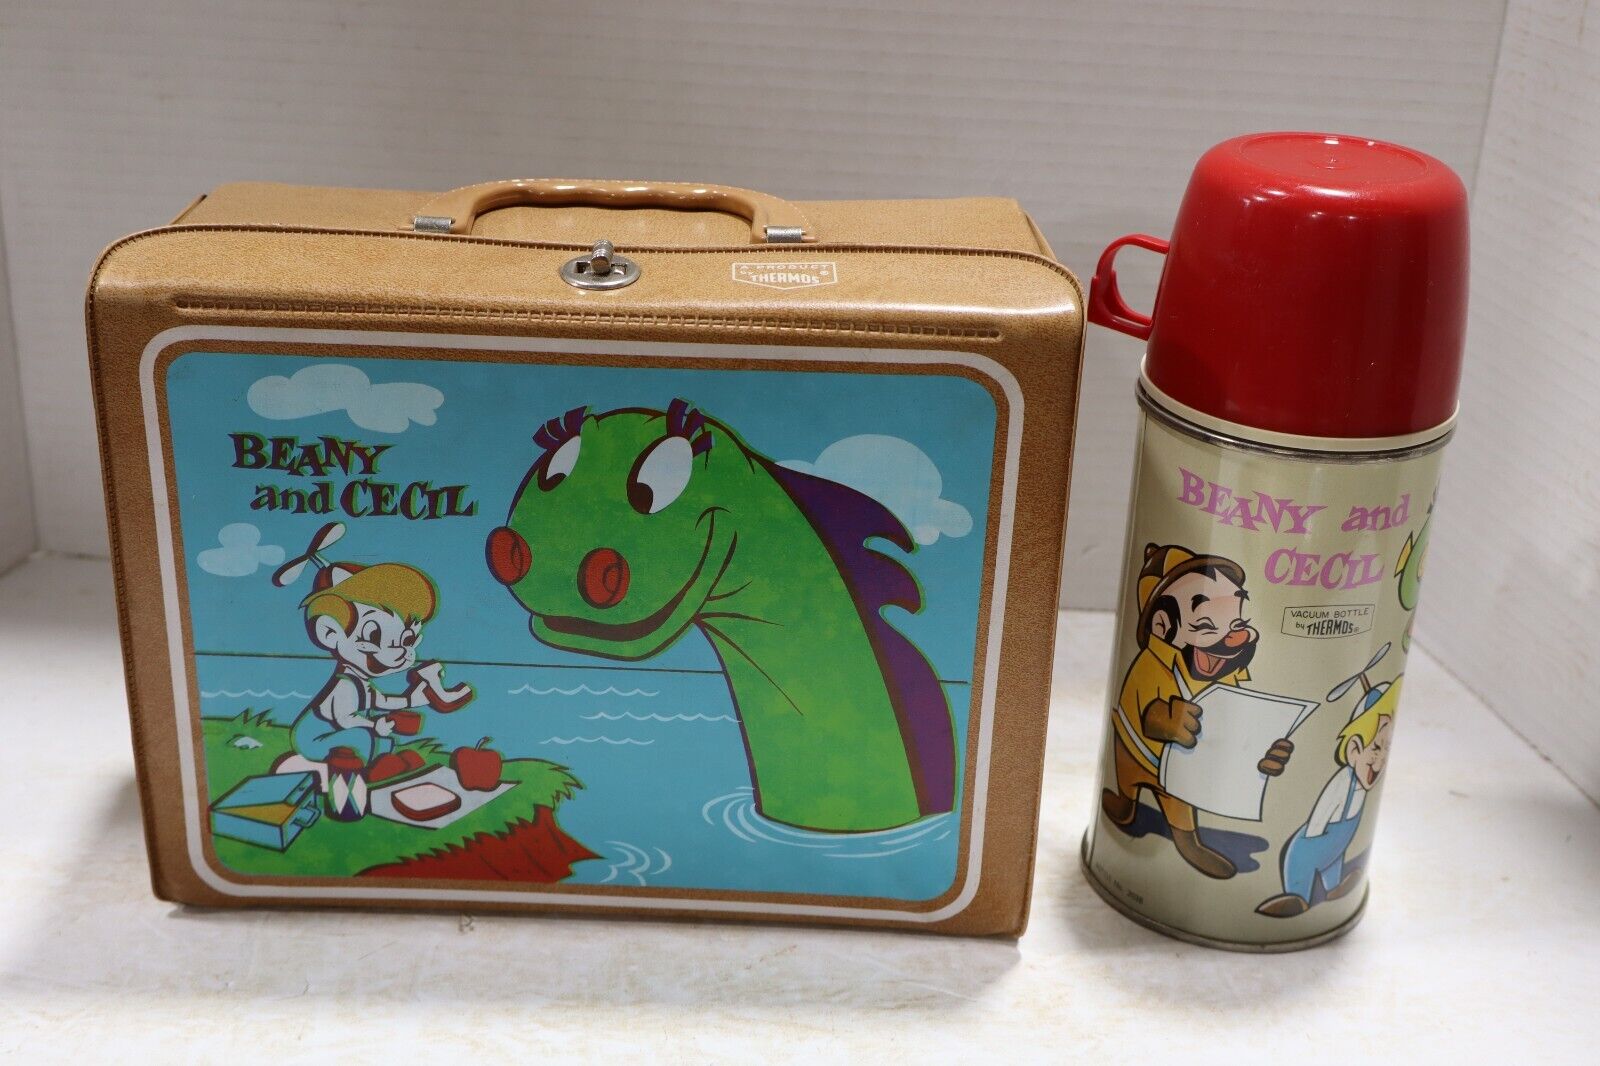 Vintage Beany And Cecil Lunchbox Tan with thermos, Rare 1963 Vinyl